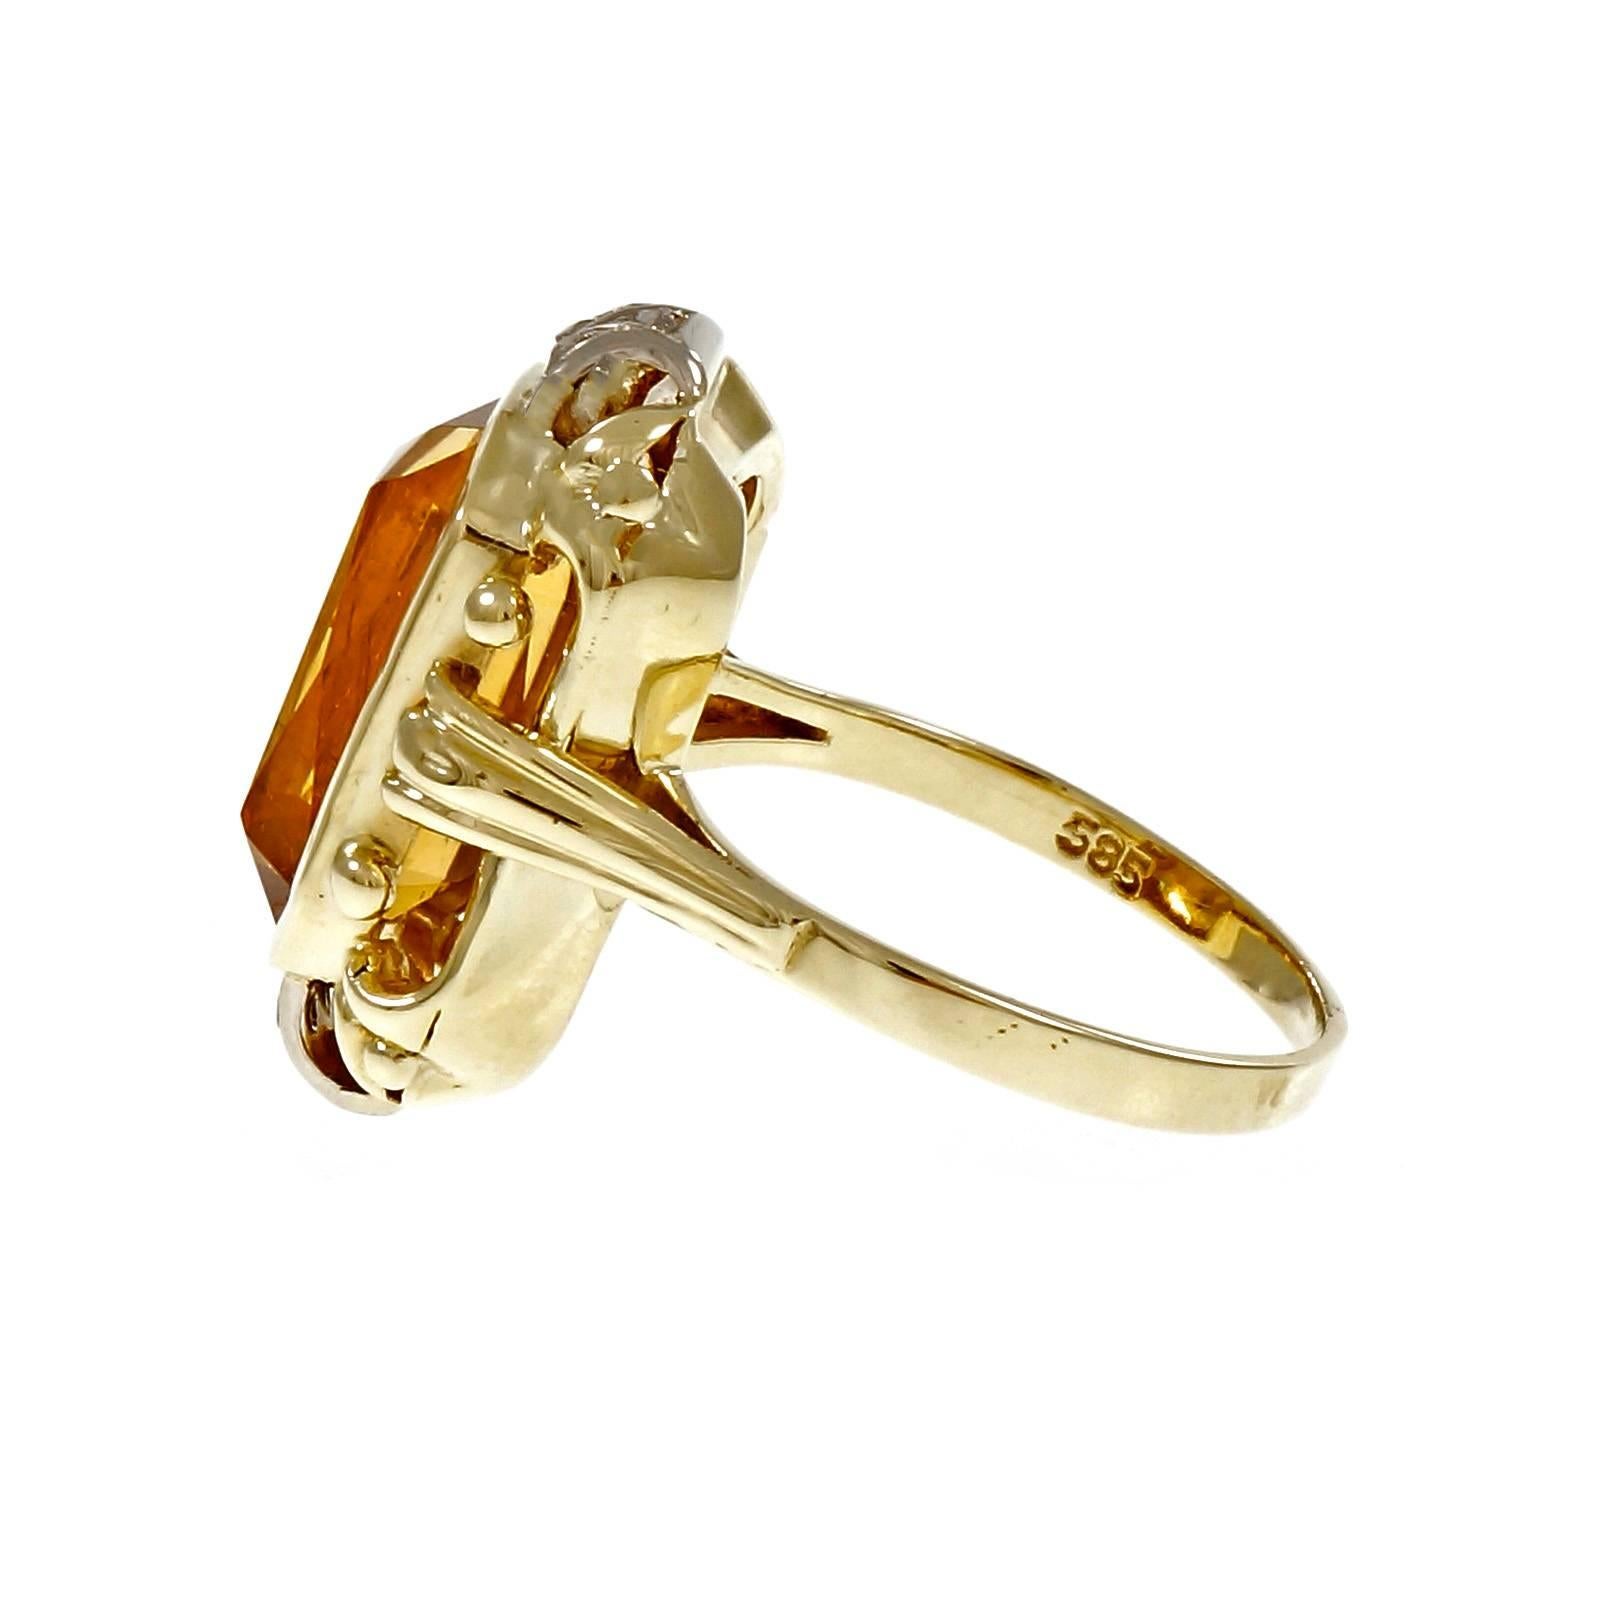 Octagonal Orange Citrine Diamond Gold Cocktail Ring.  with 6 rose cut diamonds and a bright orange yellow well-polished Citrine. 

1 octagonal orange yellow Citrine, approx. total weight 6.00cts, 13.19 x 8.90 x 6.75mm
6 rose cut diamonds, approx.